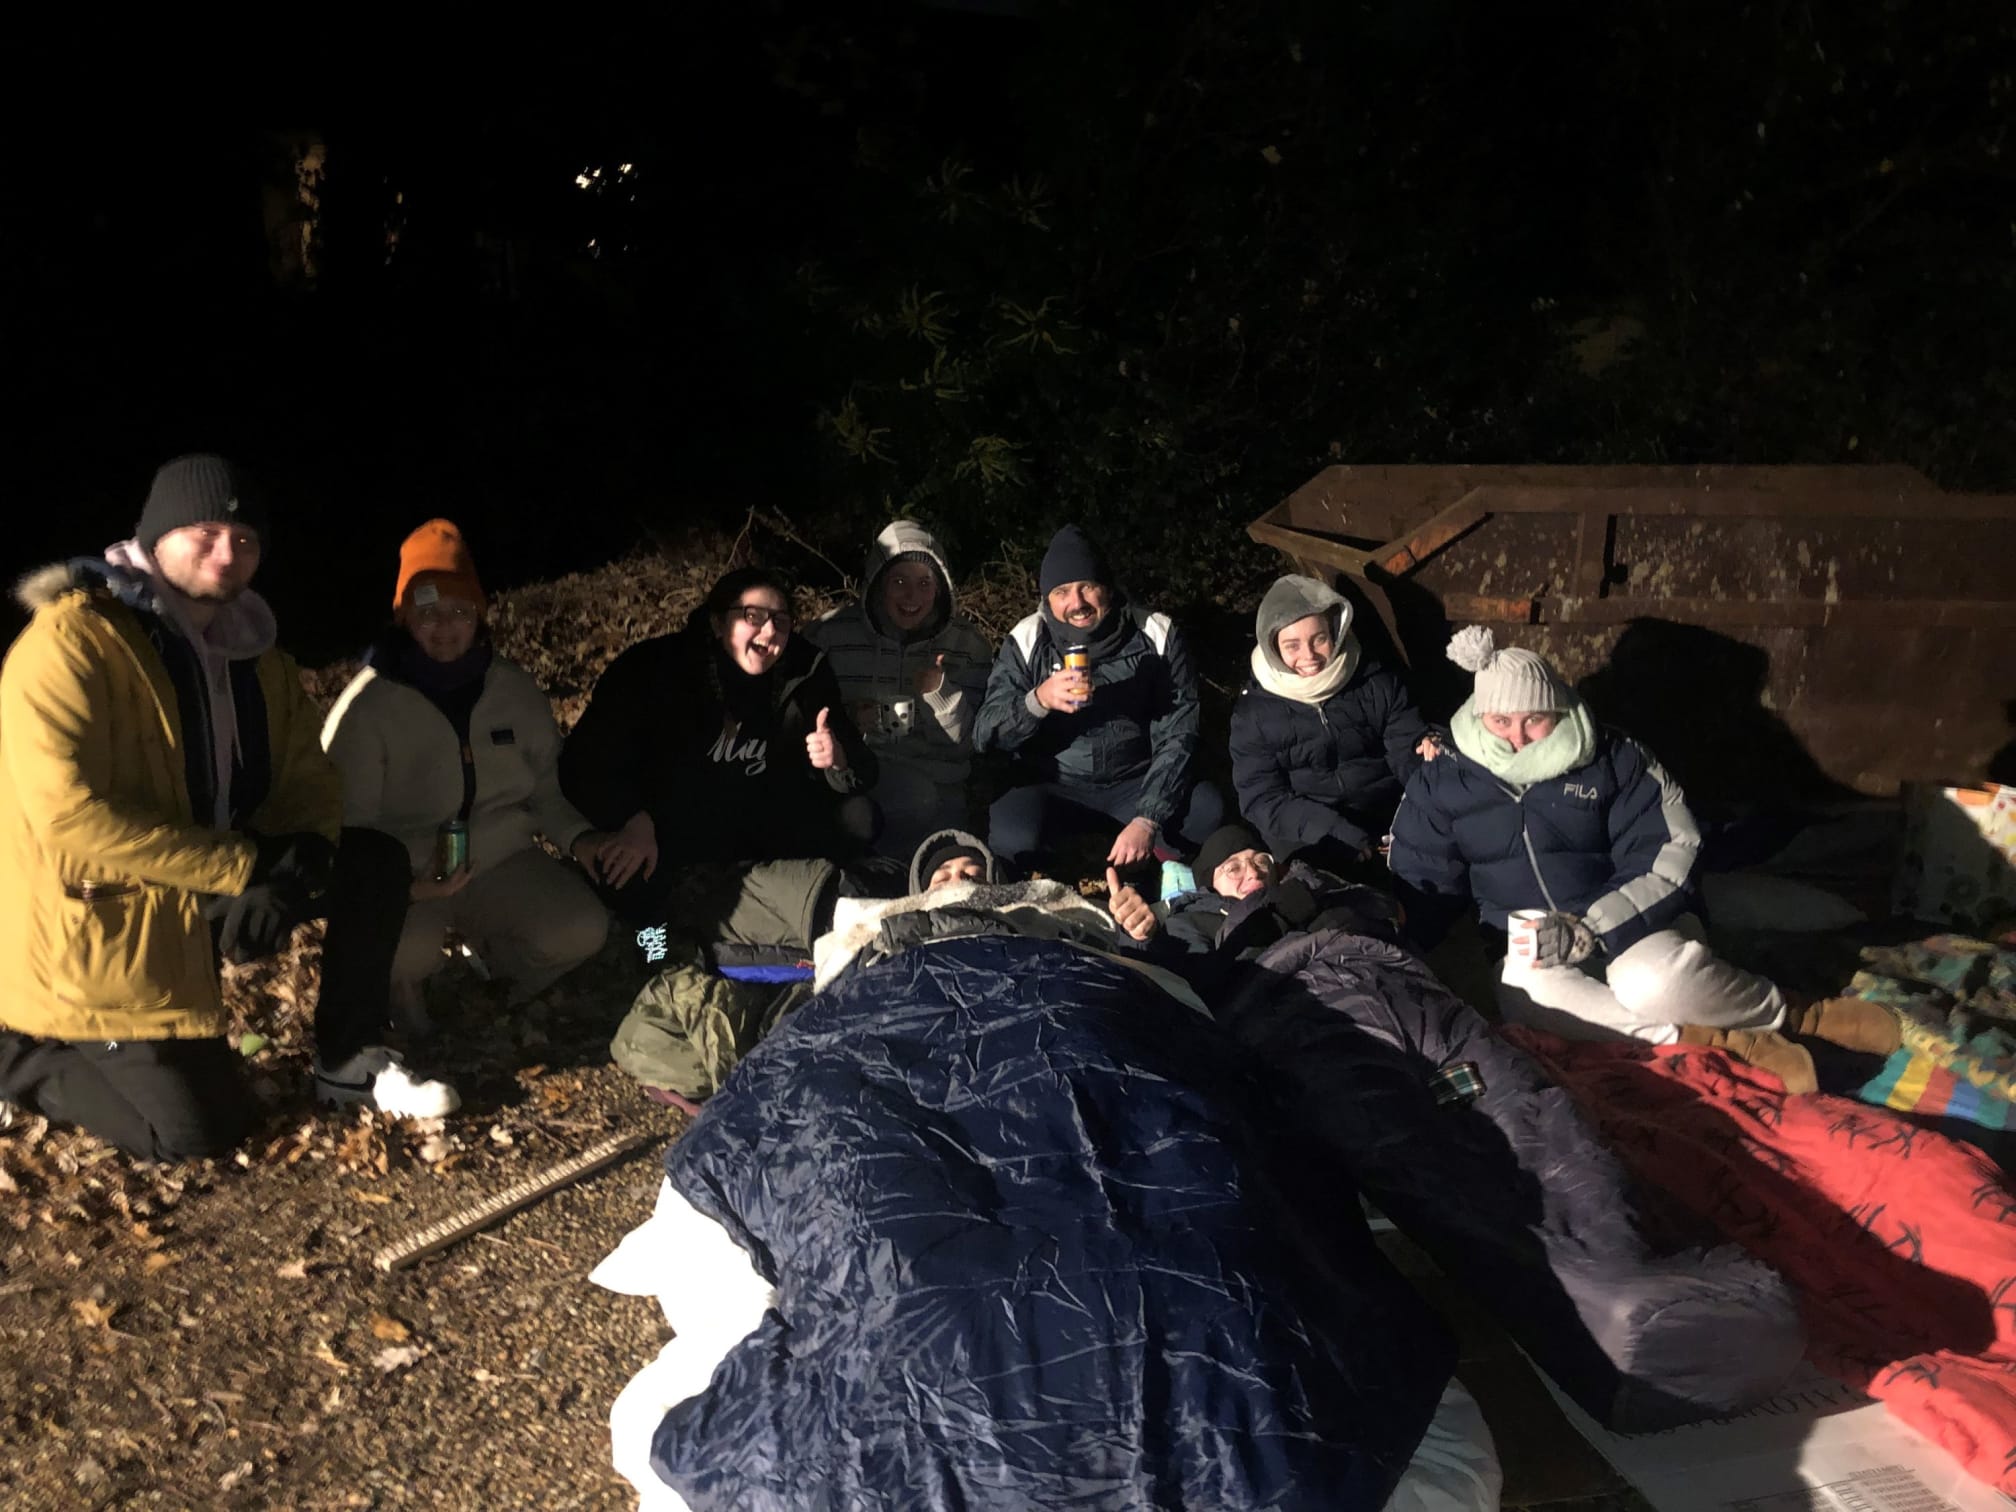 Runway Training sleep out for mental health resource